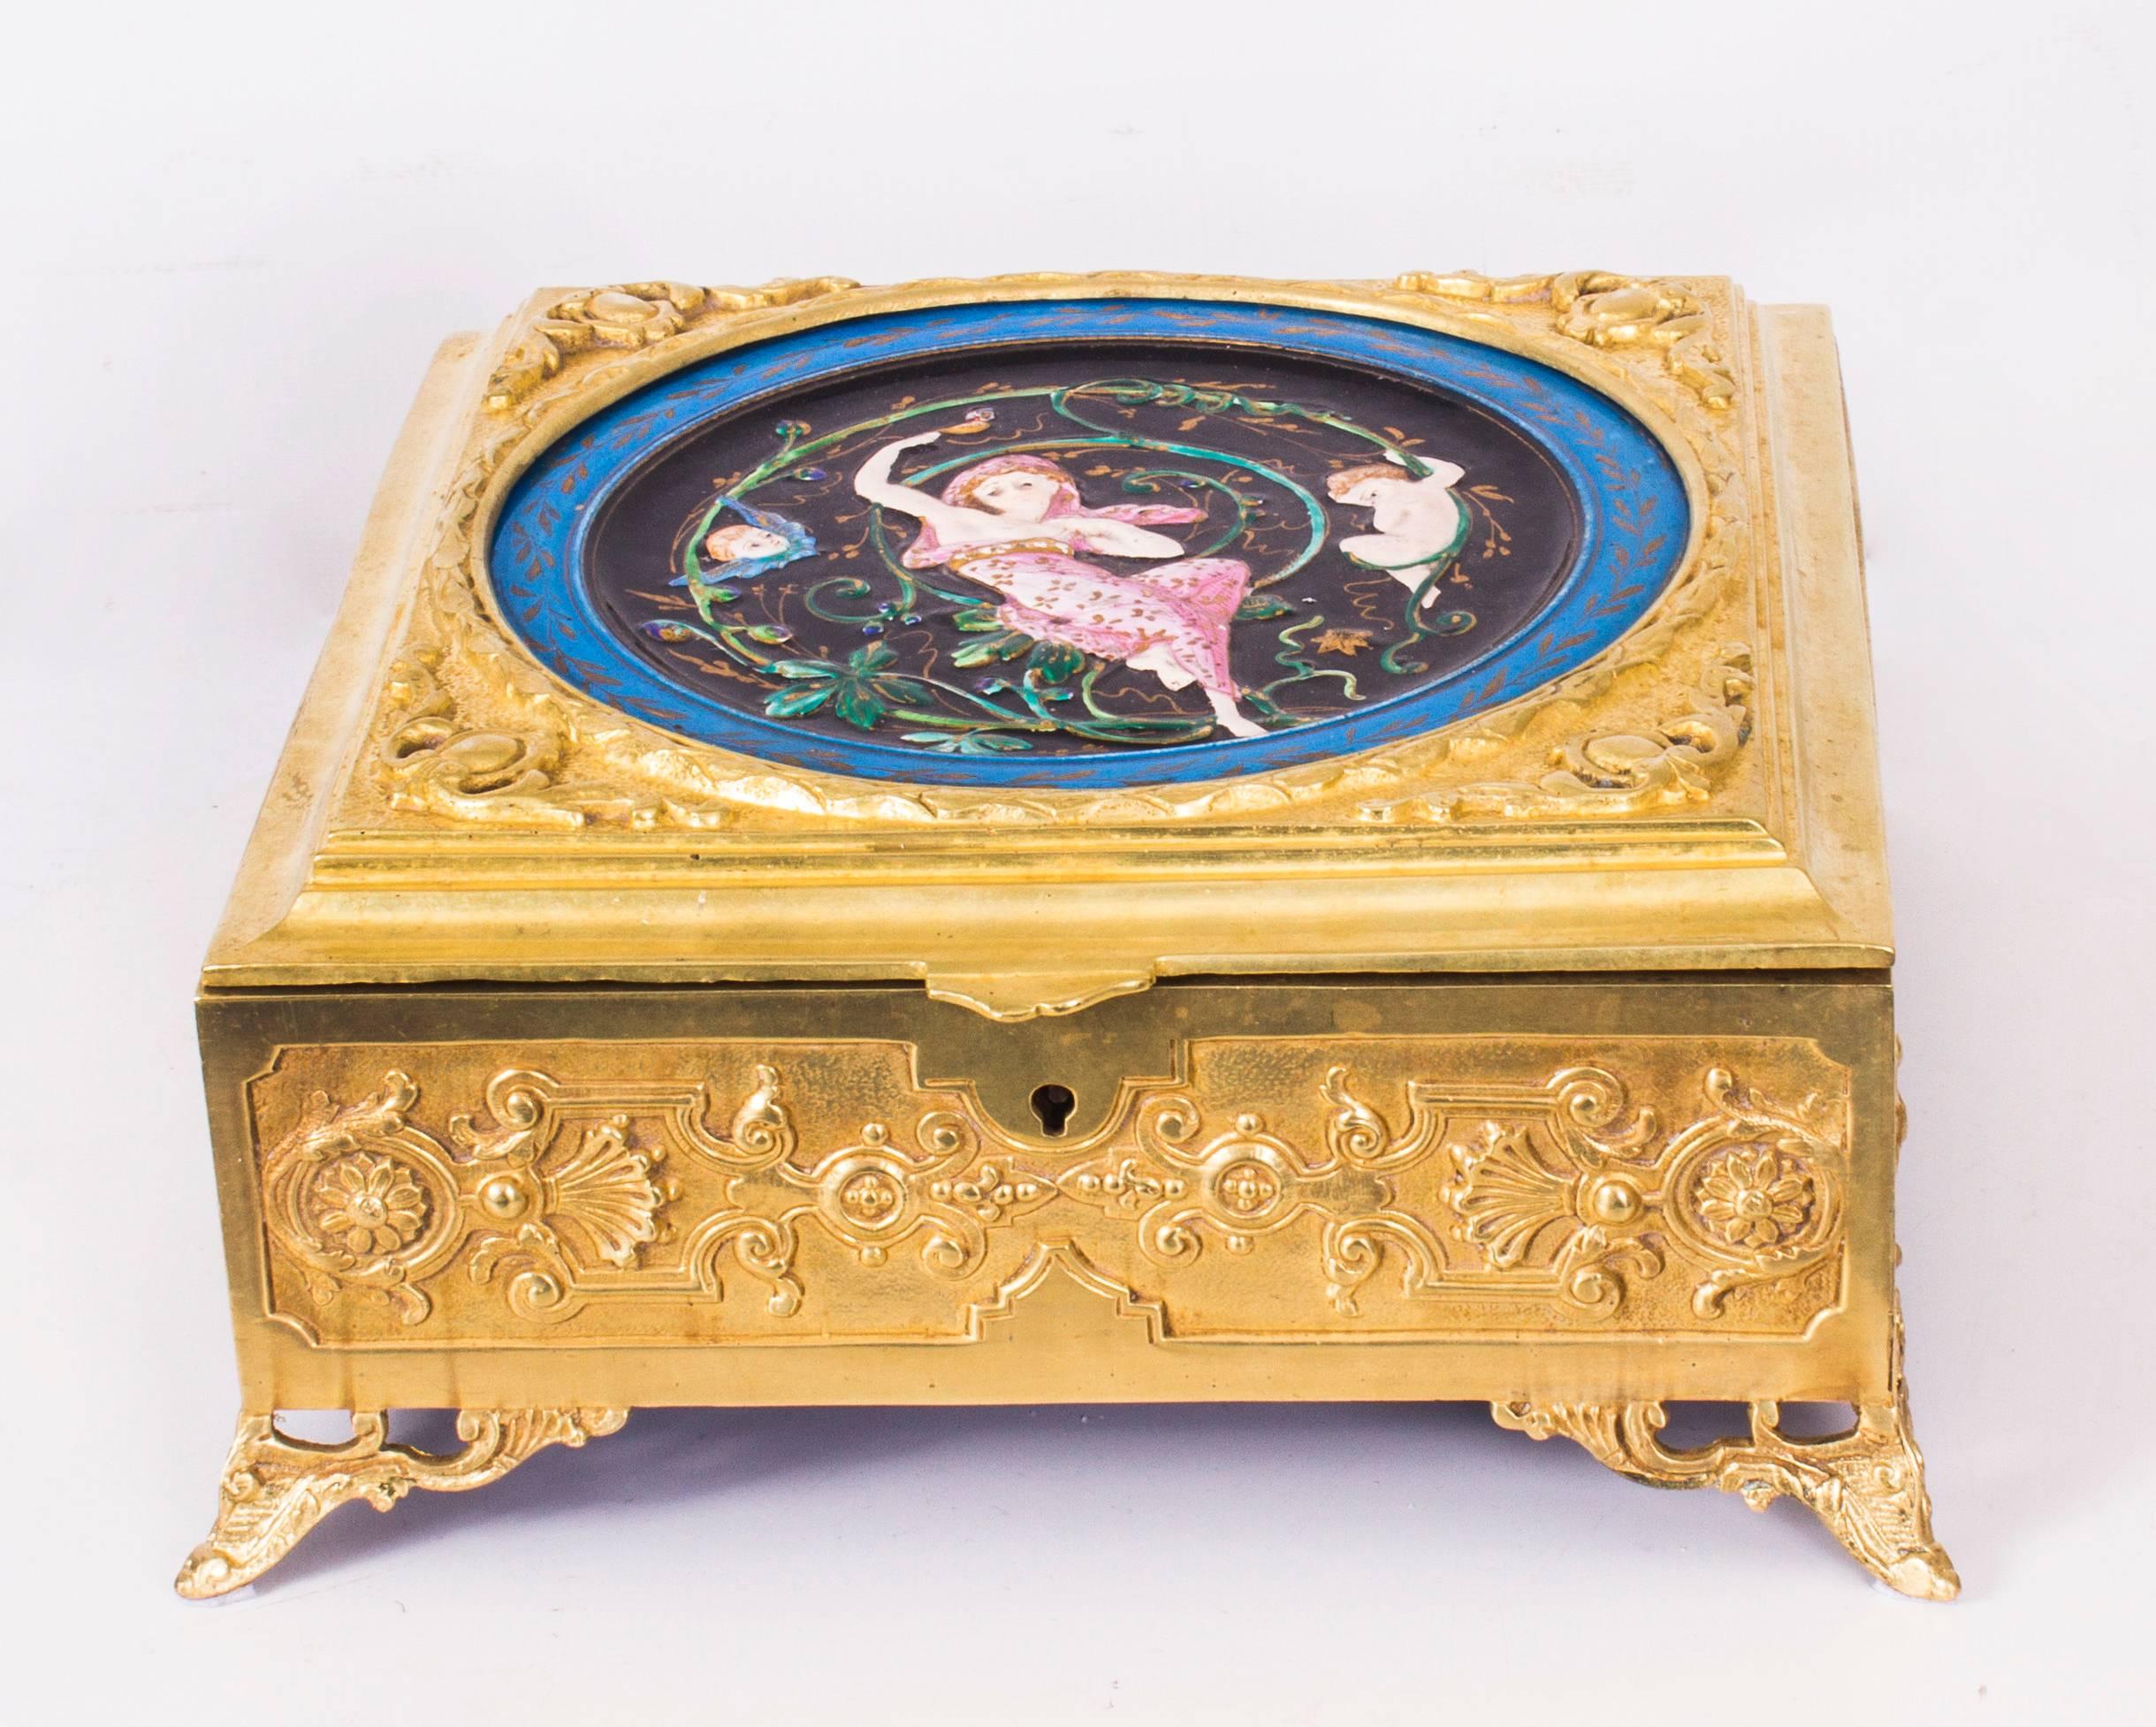 This is an absolutely fabulous antique English Art Nouveau ormolu and Minton porcelain casket, circa 1890 in date.

The top is inset with a superb hand painted rectangular porcelain plaque with cherubs and a maiden decorated in relief. The ormolu